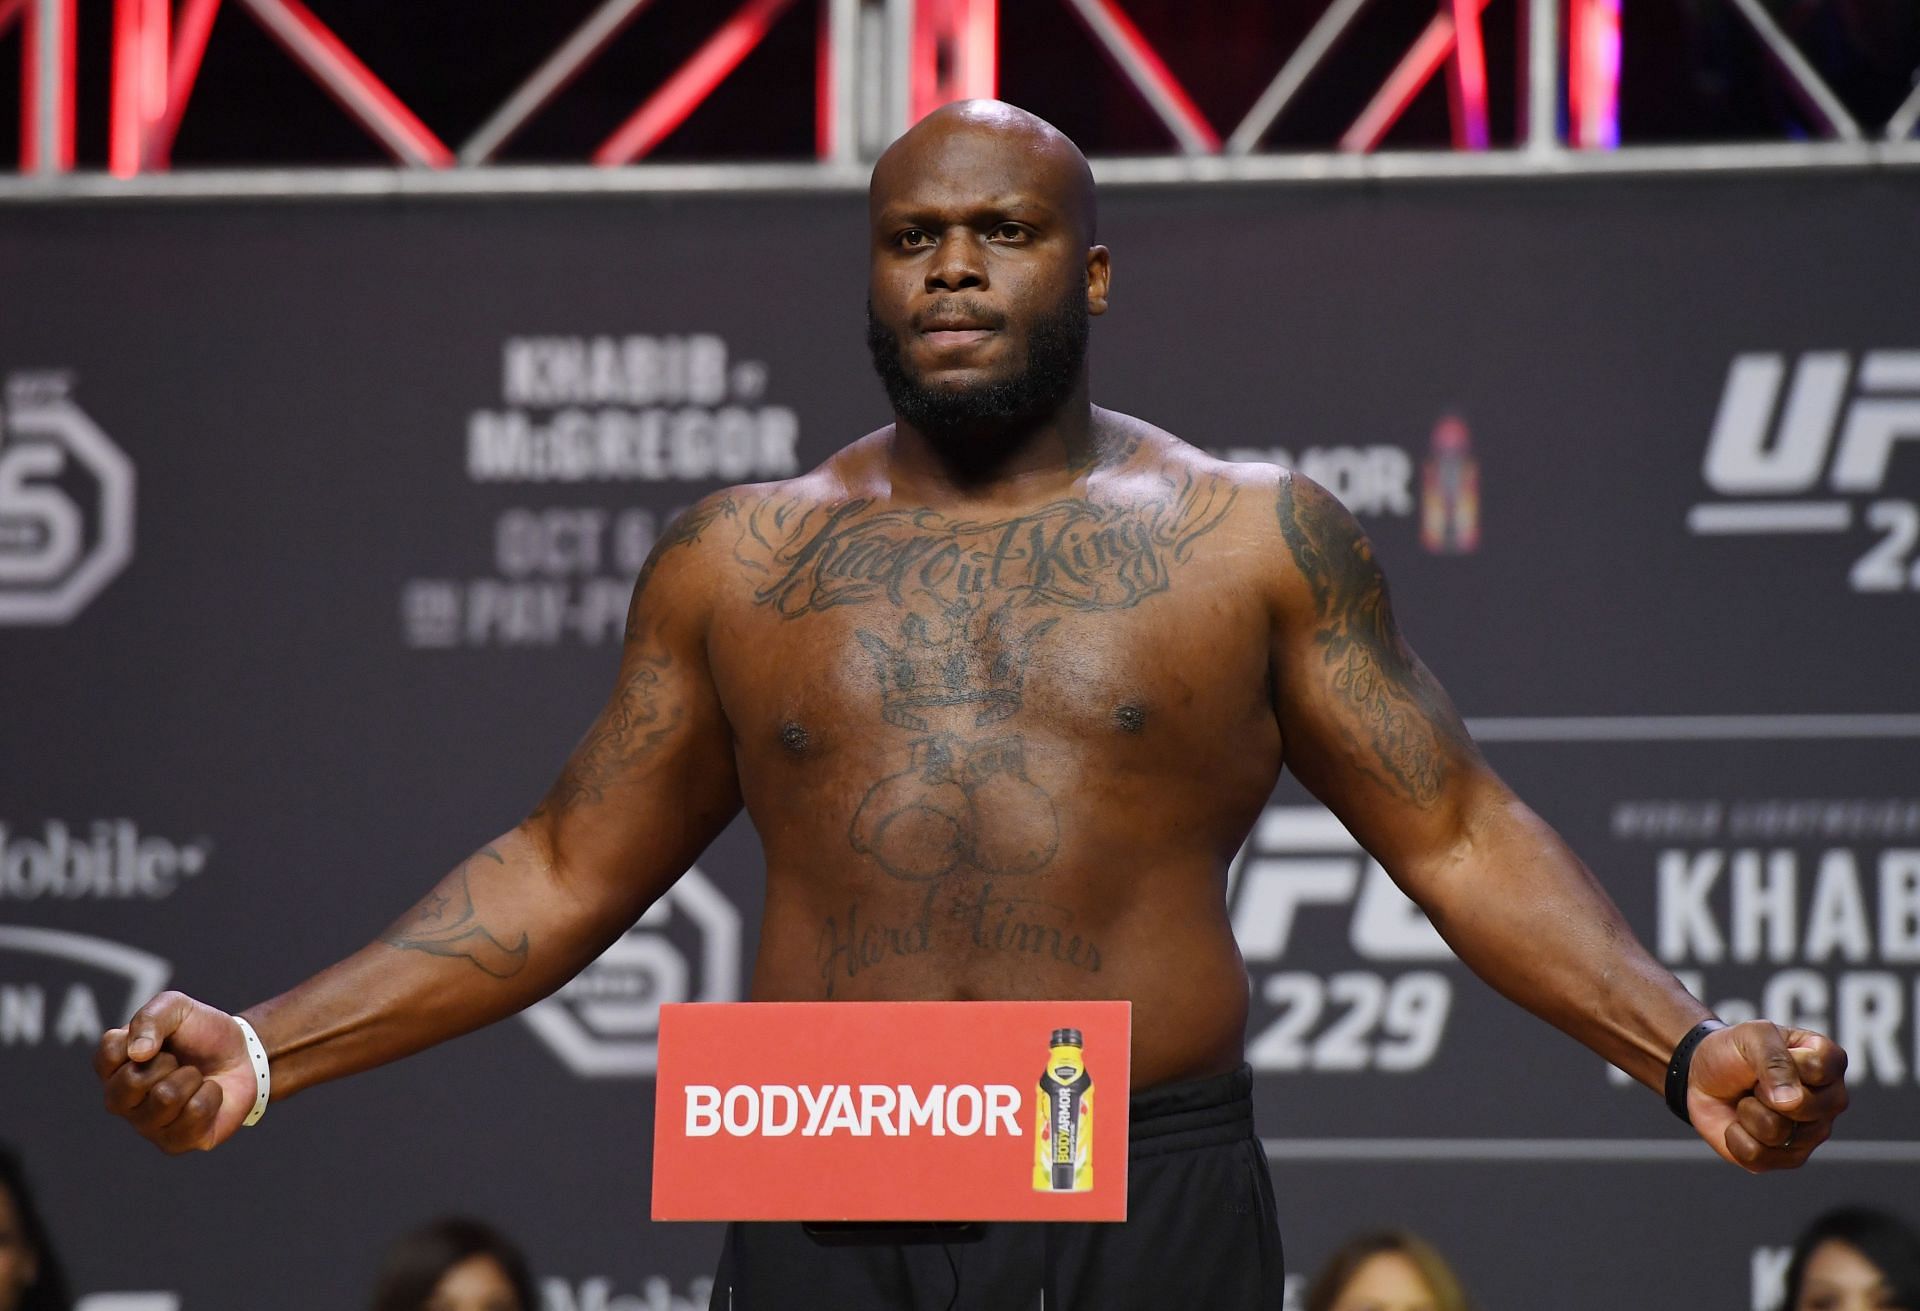 Derrick Lewis is scheduled to face Tai Tuivasa on February 12